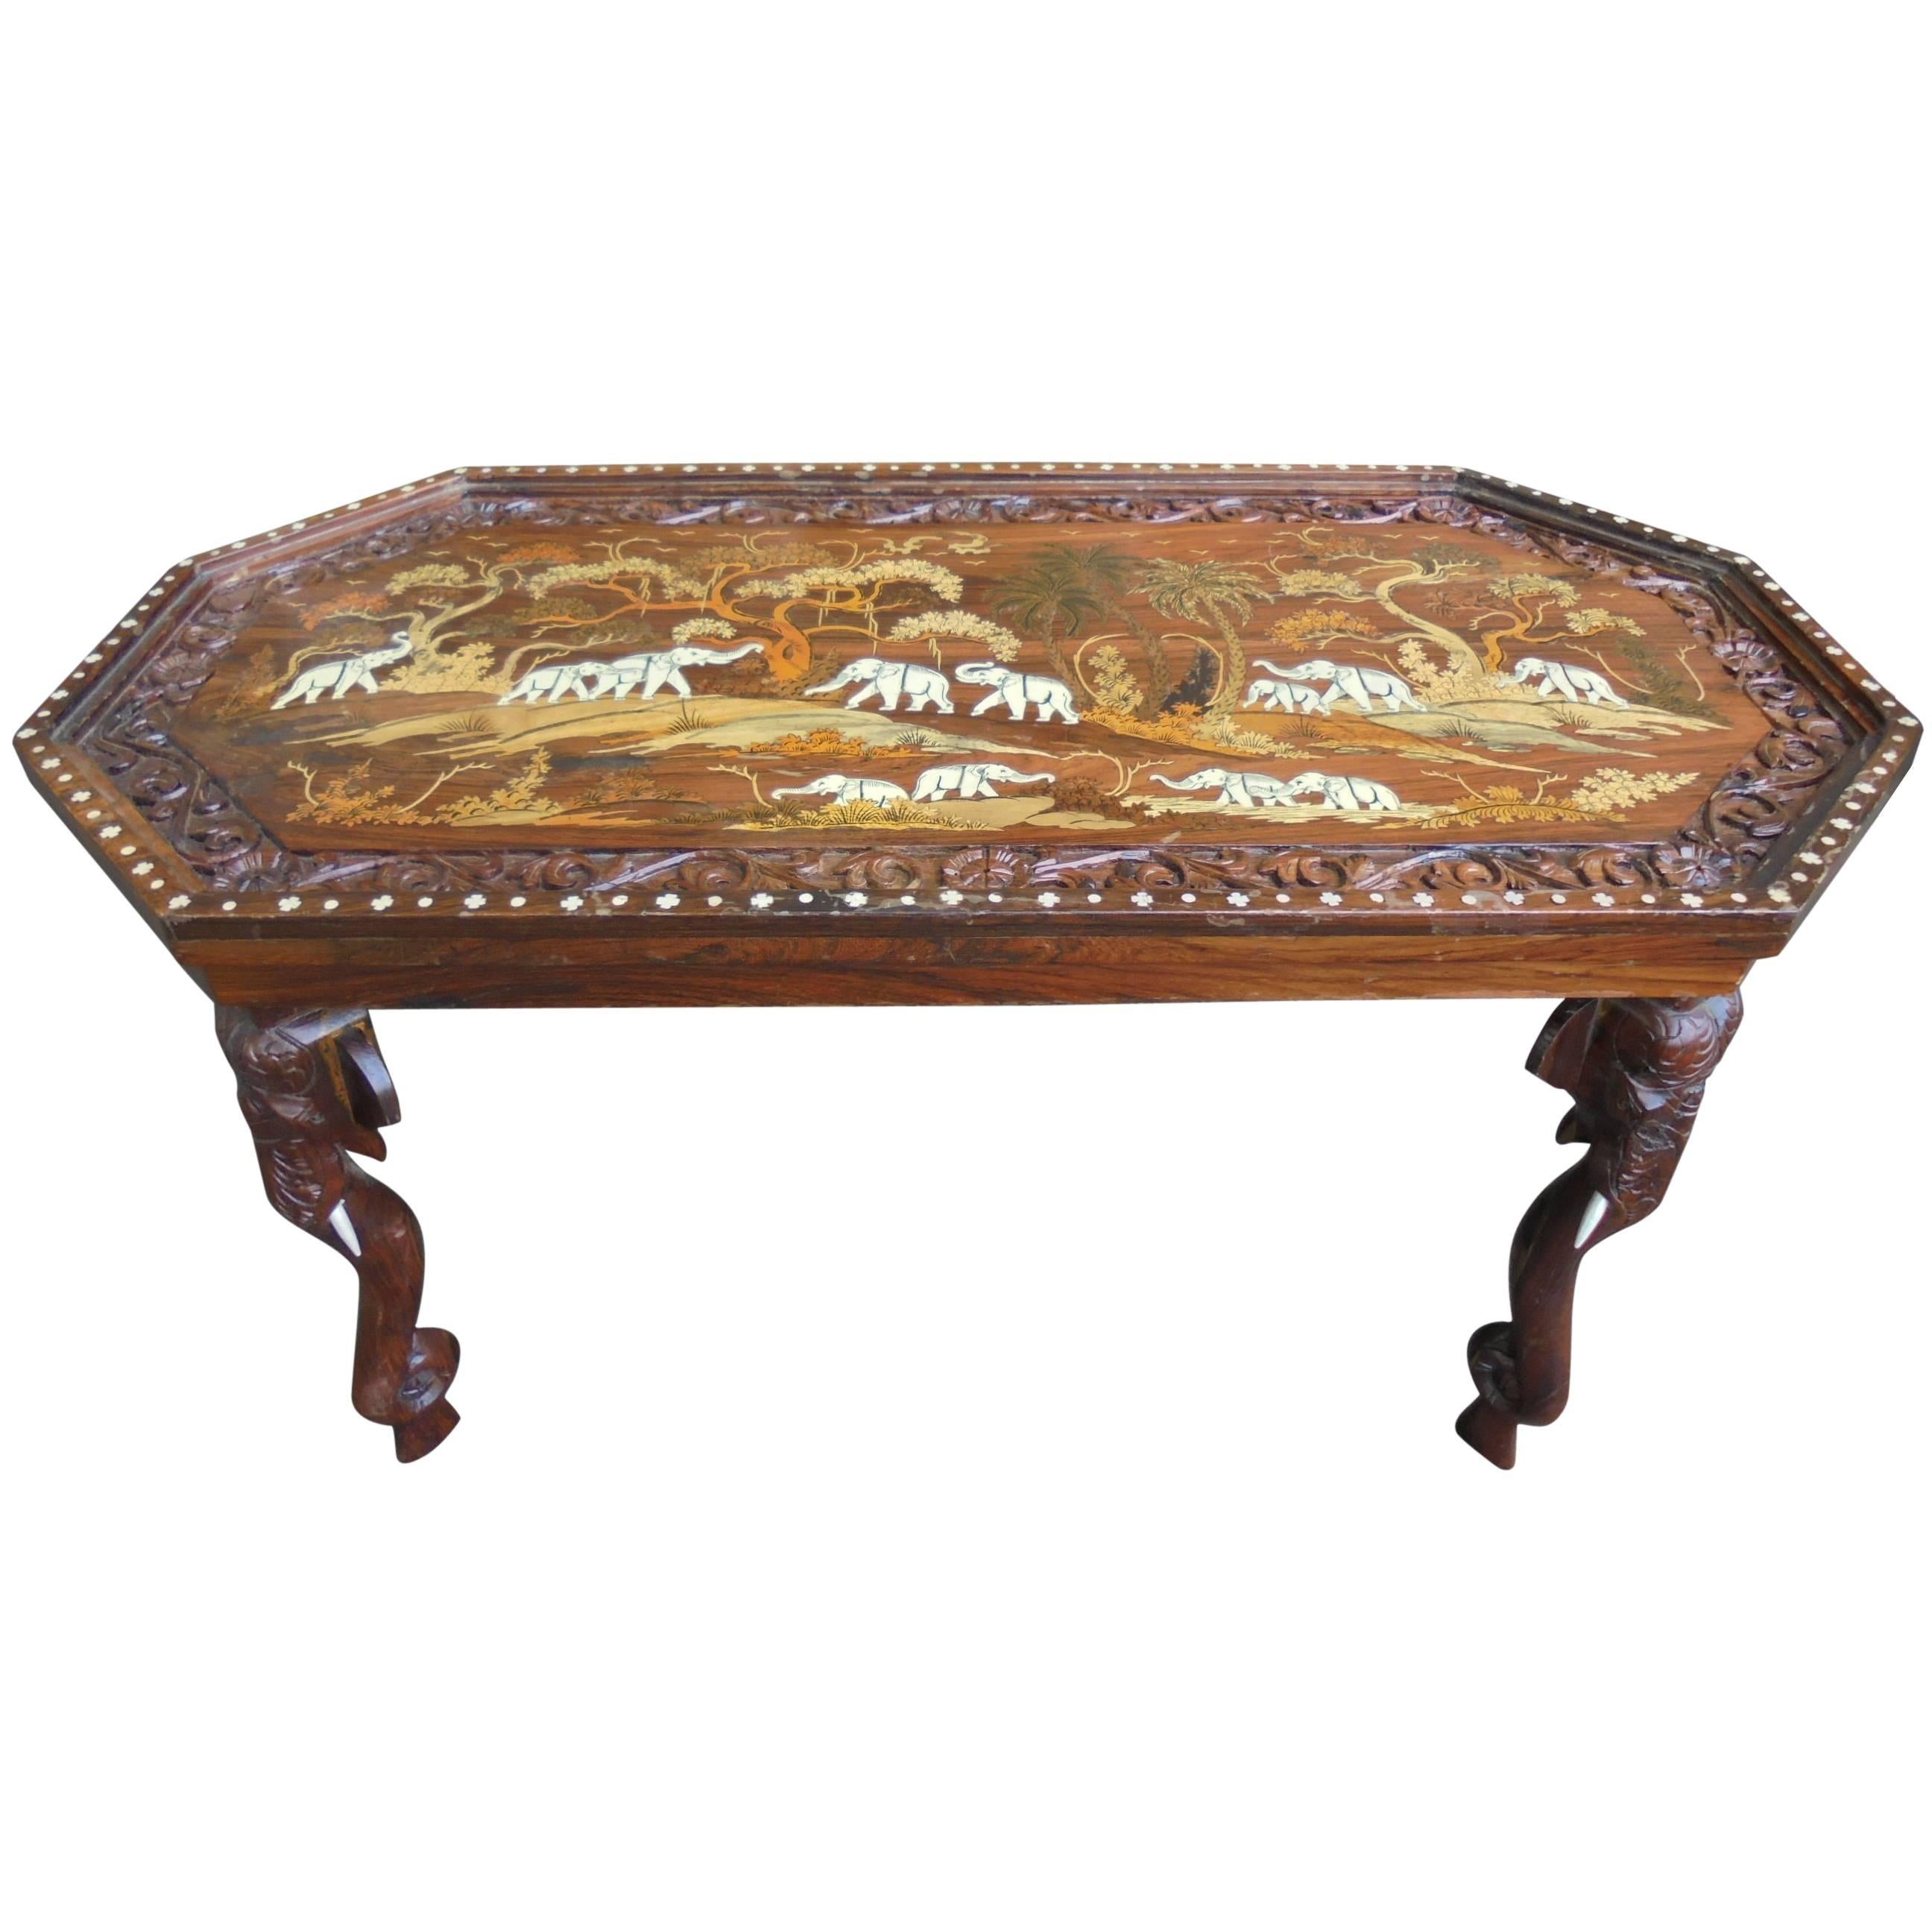 Antique Anglo-Indian Inlaid Hardwood Coffee Table For Sale